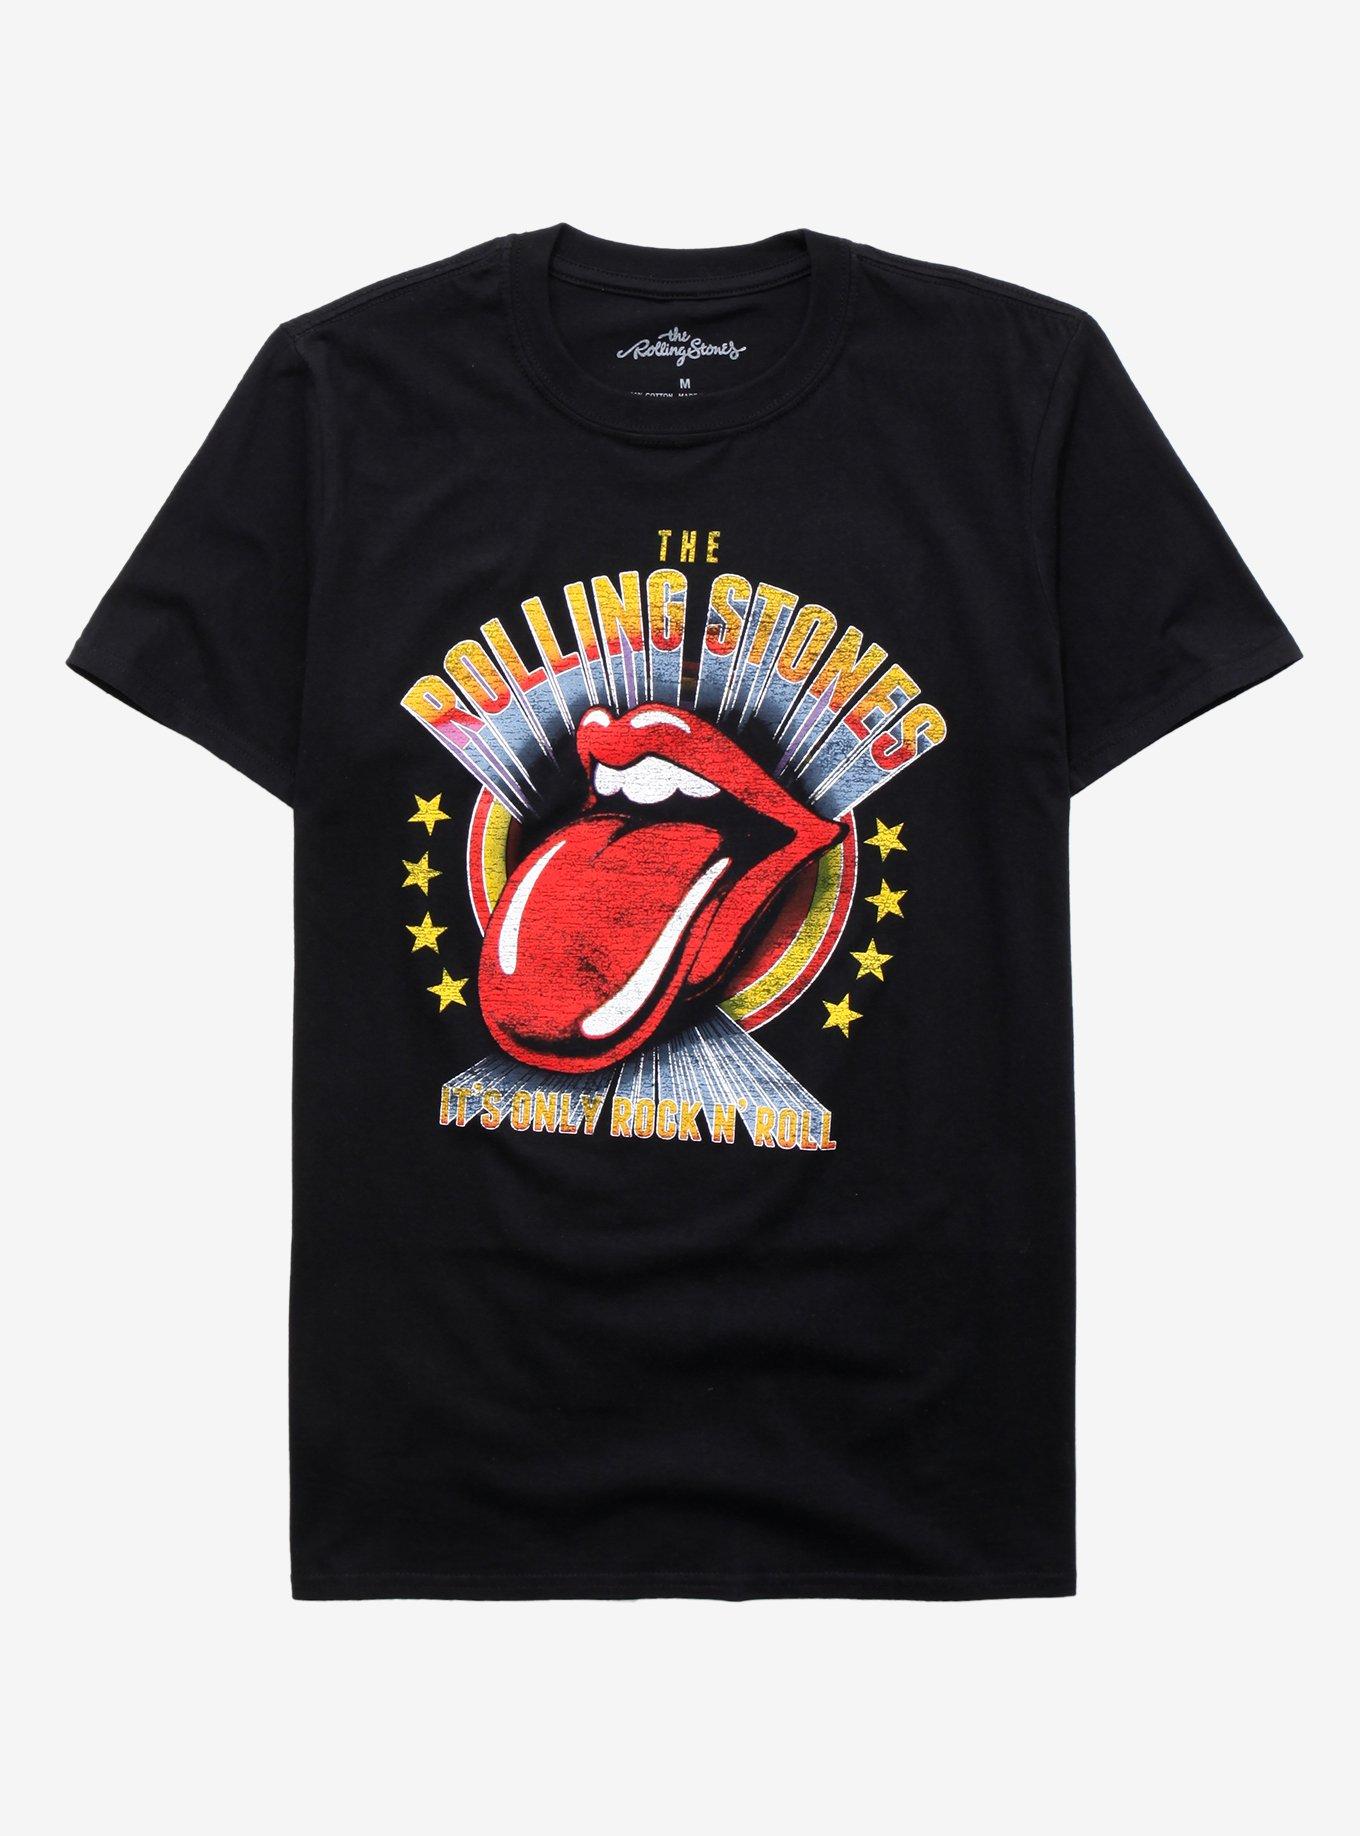 The Rolling Stones It's Only Rock N' Roll T-Shirt, BLACK, hi-res